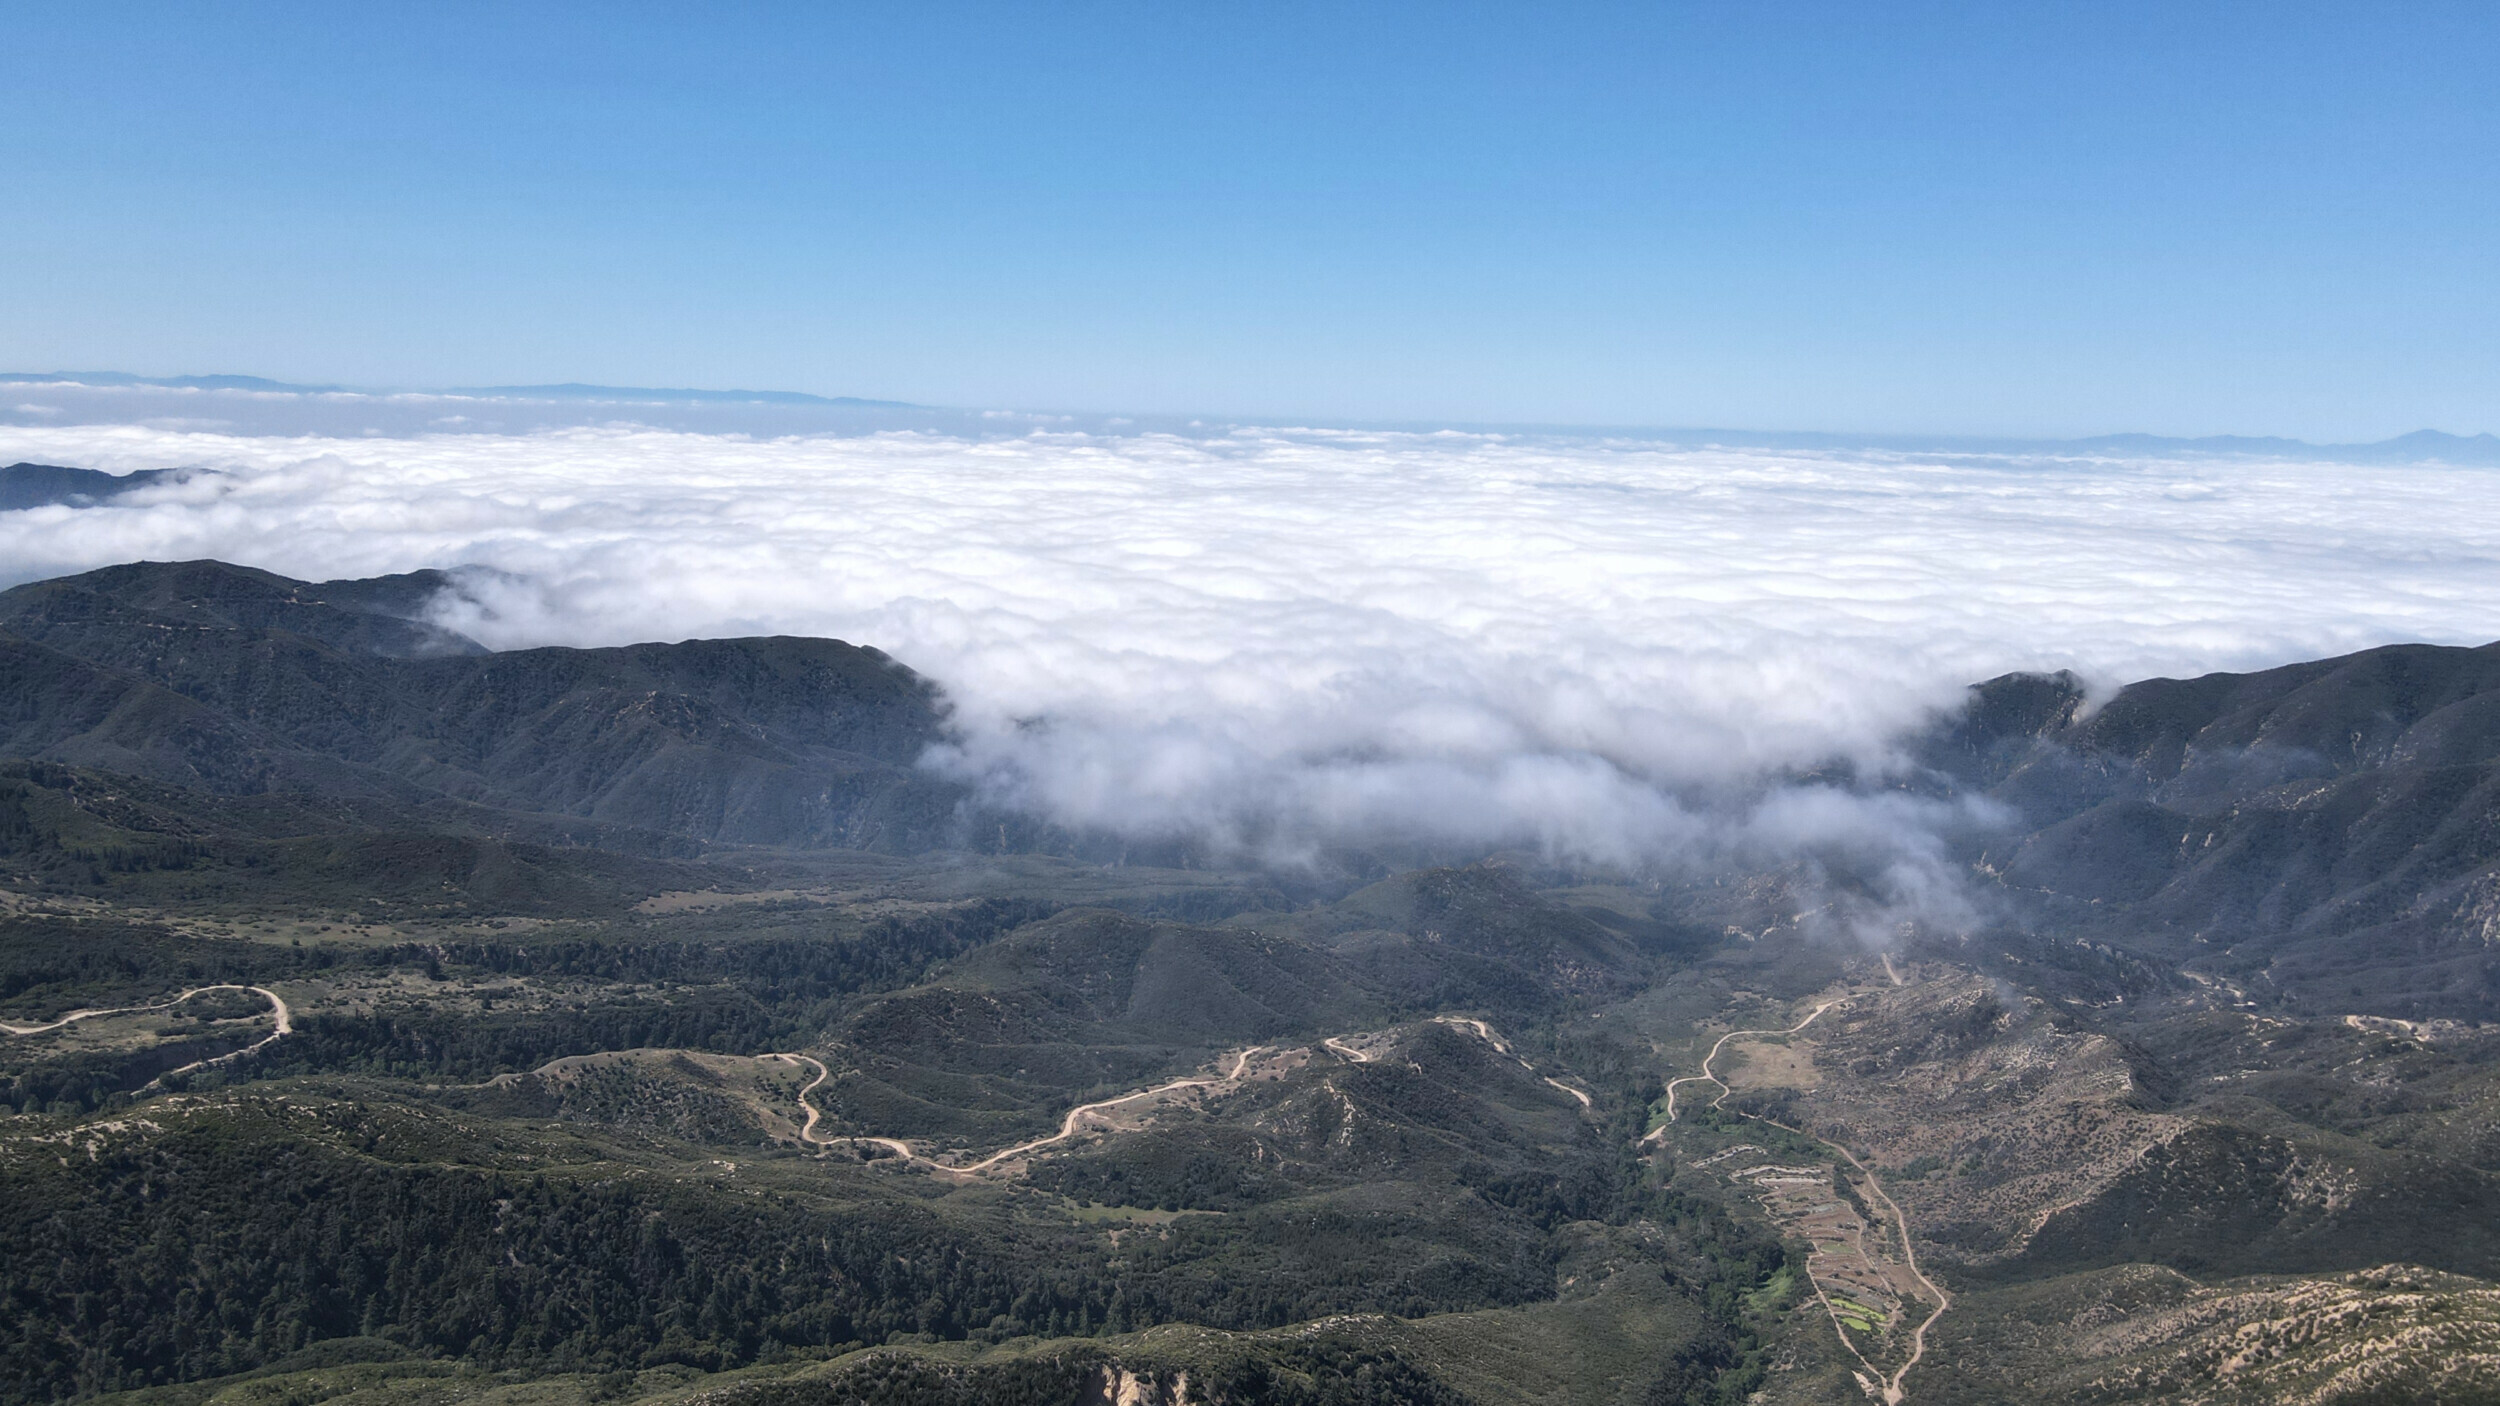 Overlooking a blanket of clouds covering the valleys of Big Bear Mountain Range in California.